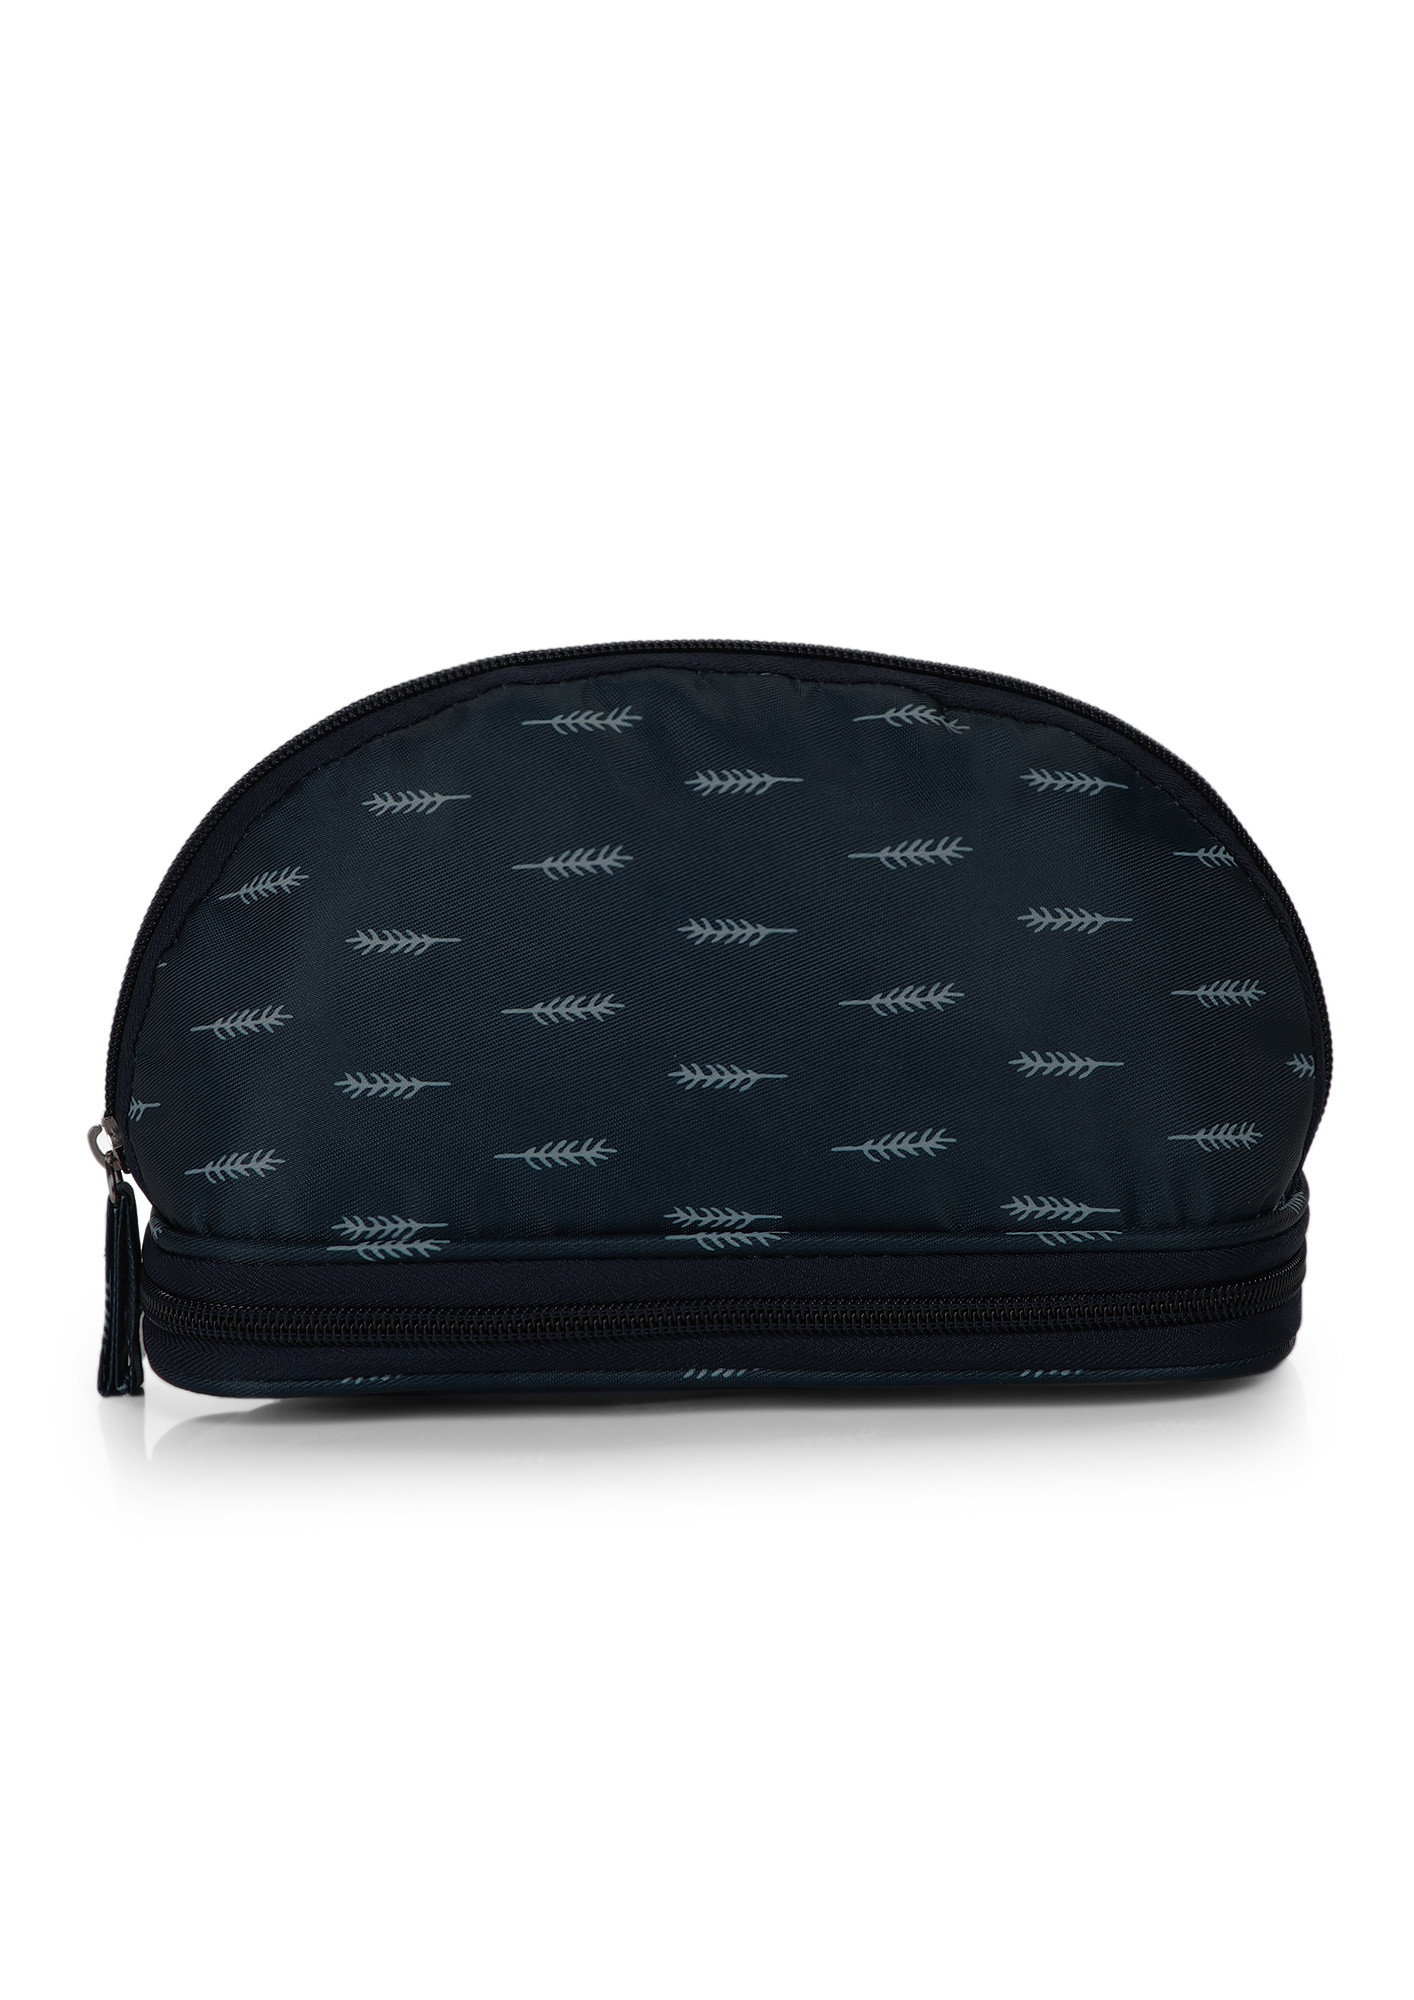 THINK IT THROUGH NAVY MAKE-UP POUCH 